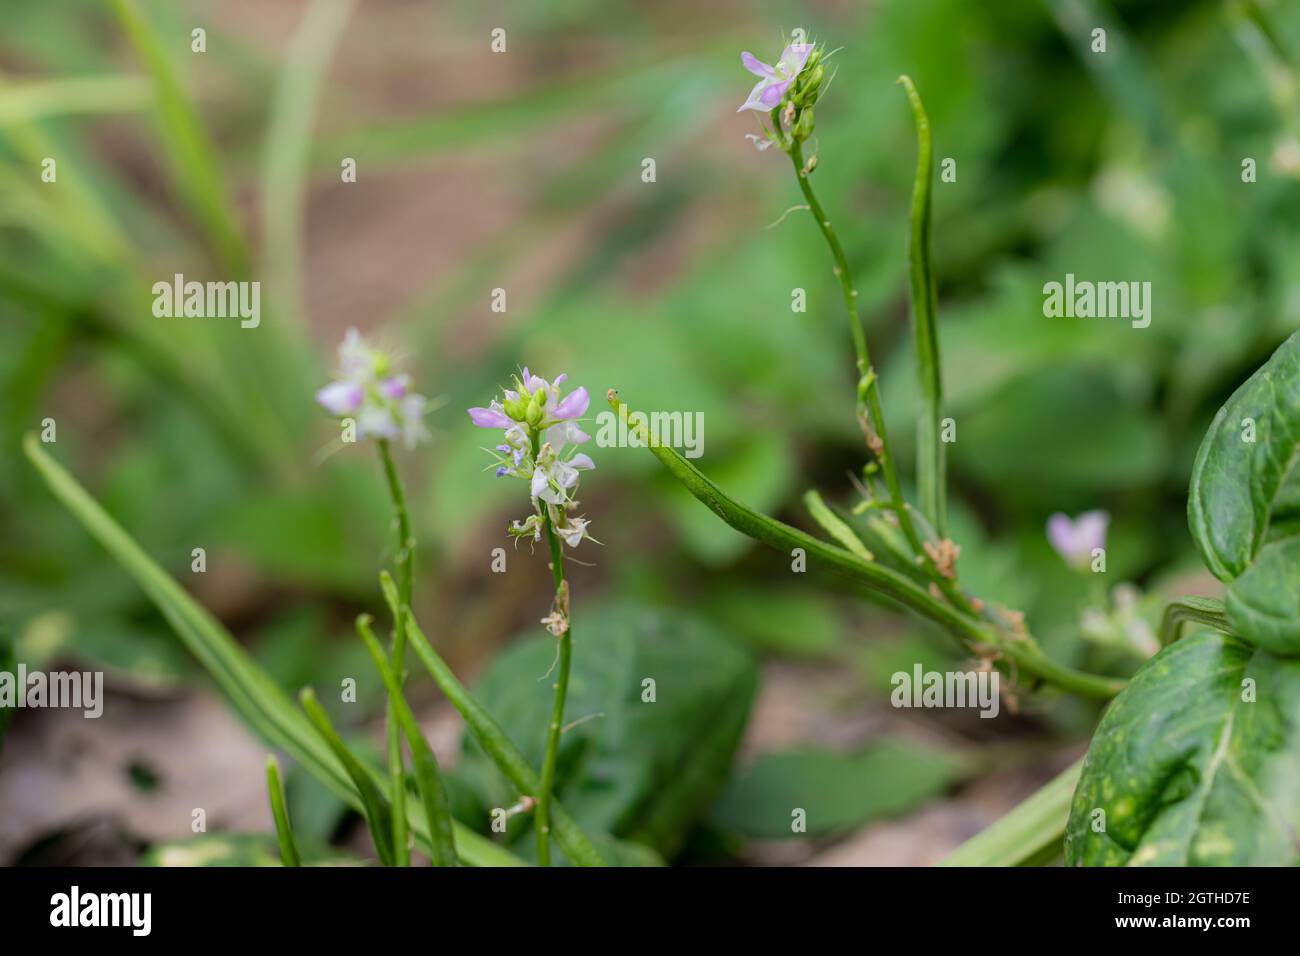 Close-up of Group of flowers of organic Thai hybrid variety green lentil plant Guar bean (Guar gum, also called guara ) plant blooming in the agricult Stock Photo